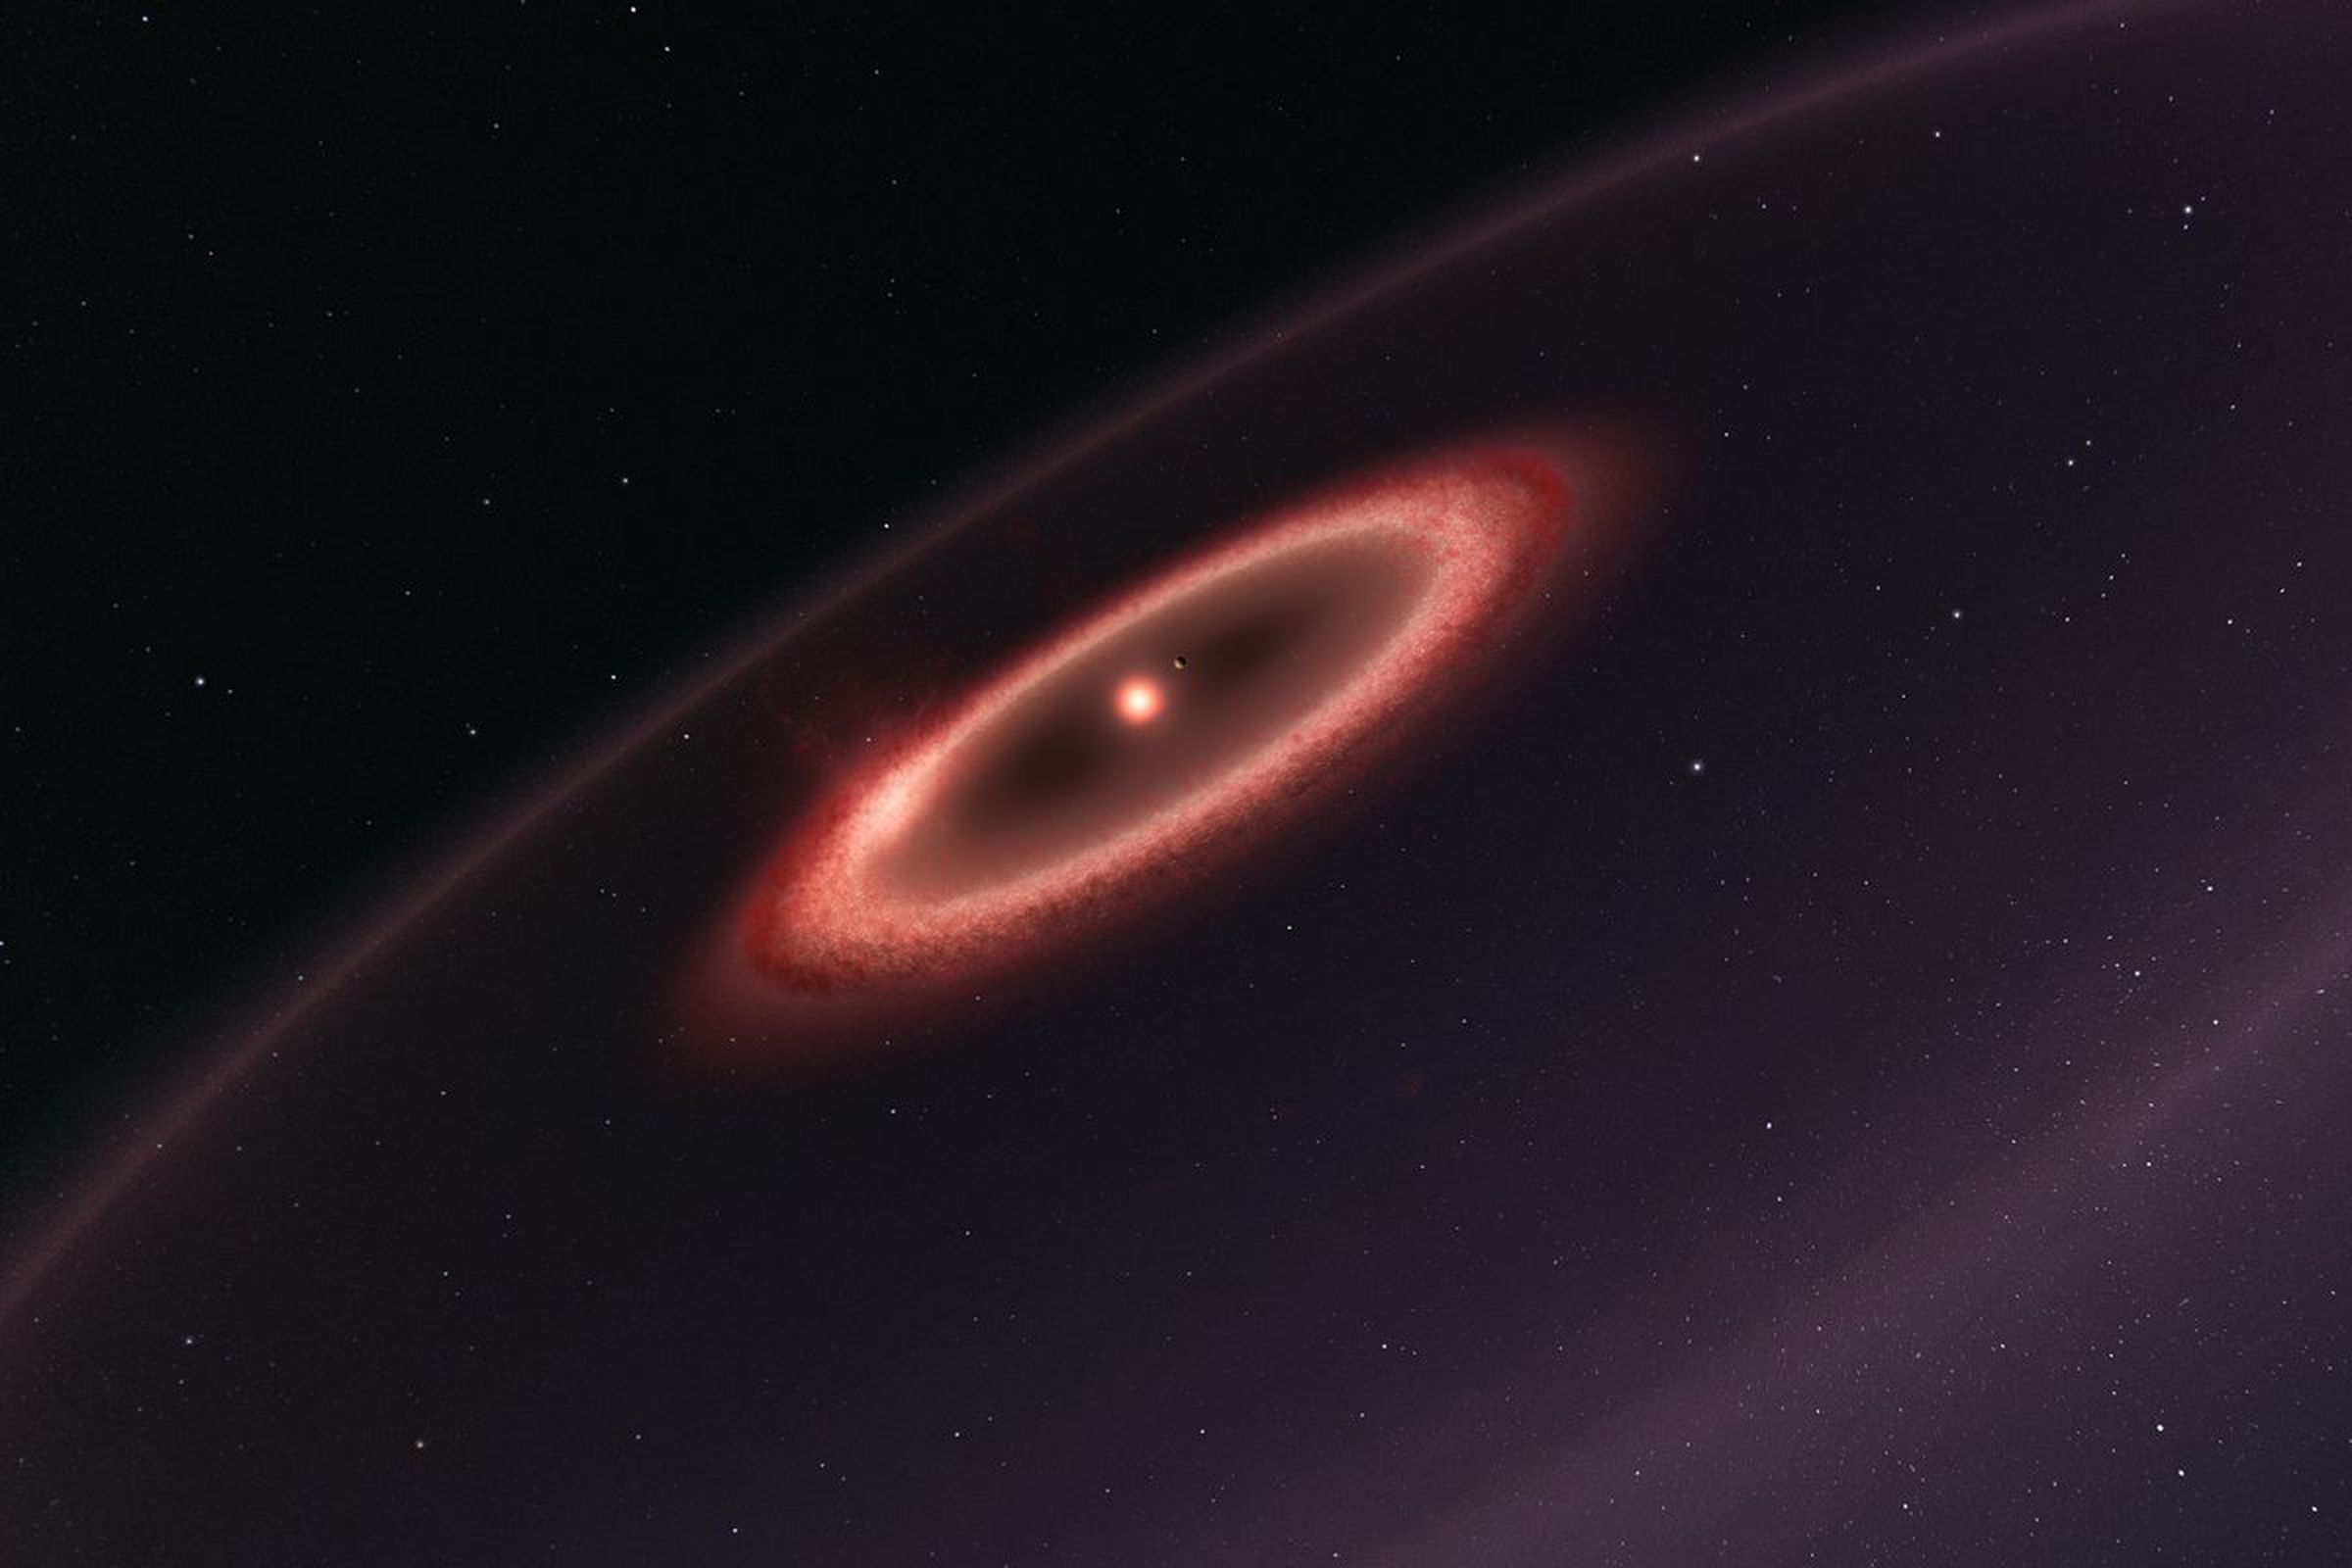 An artist rendering of the dust bands around Proxima Centauri